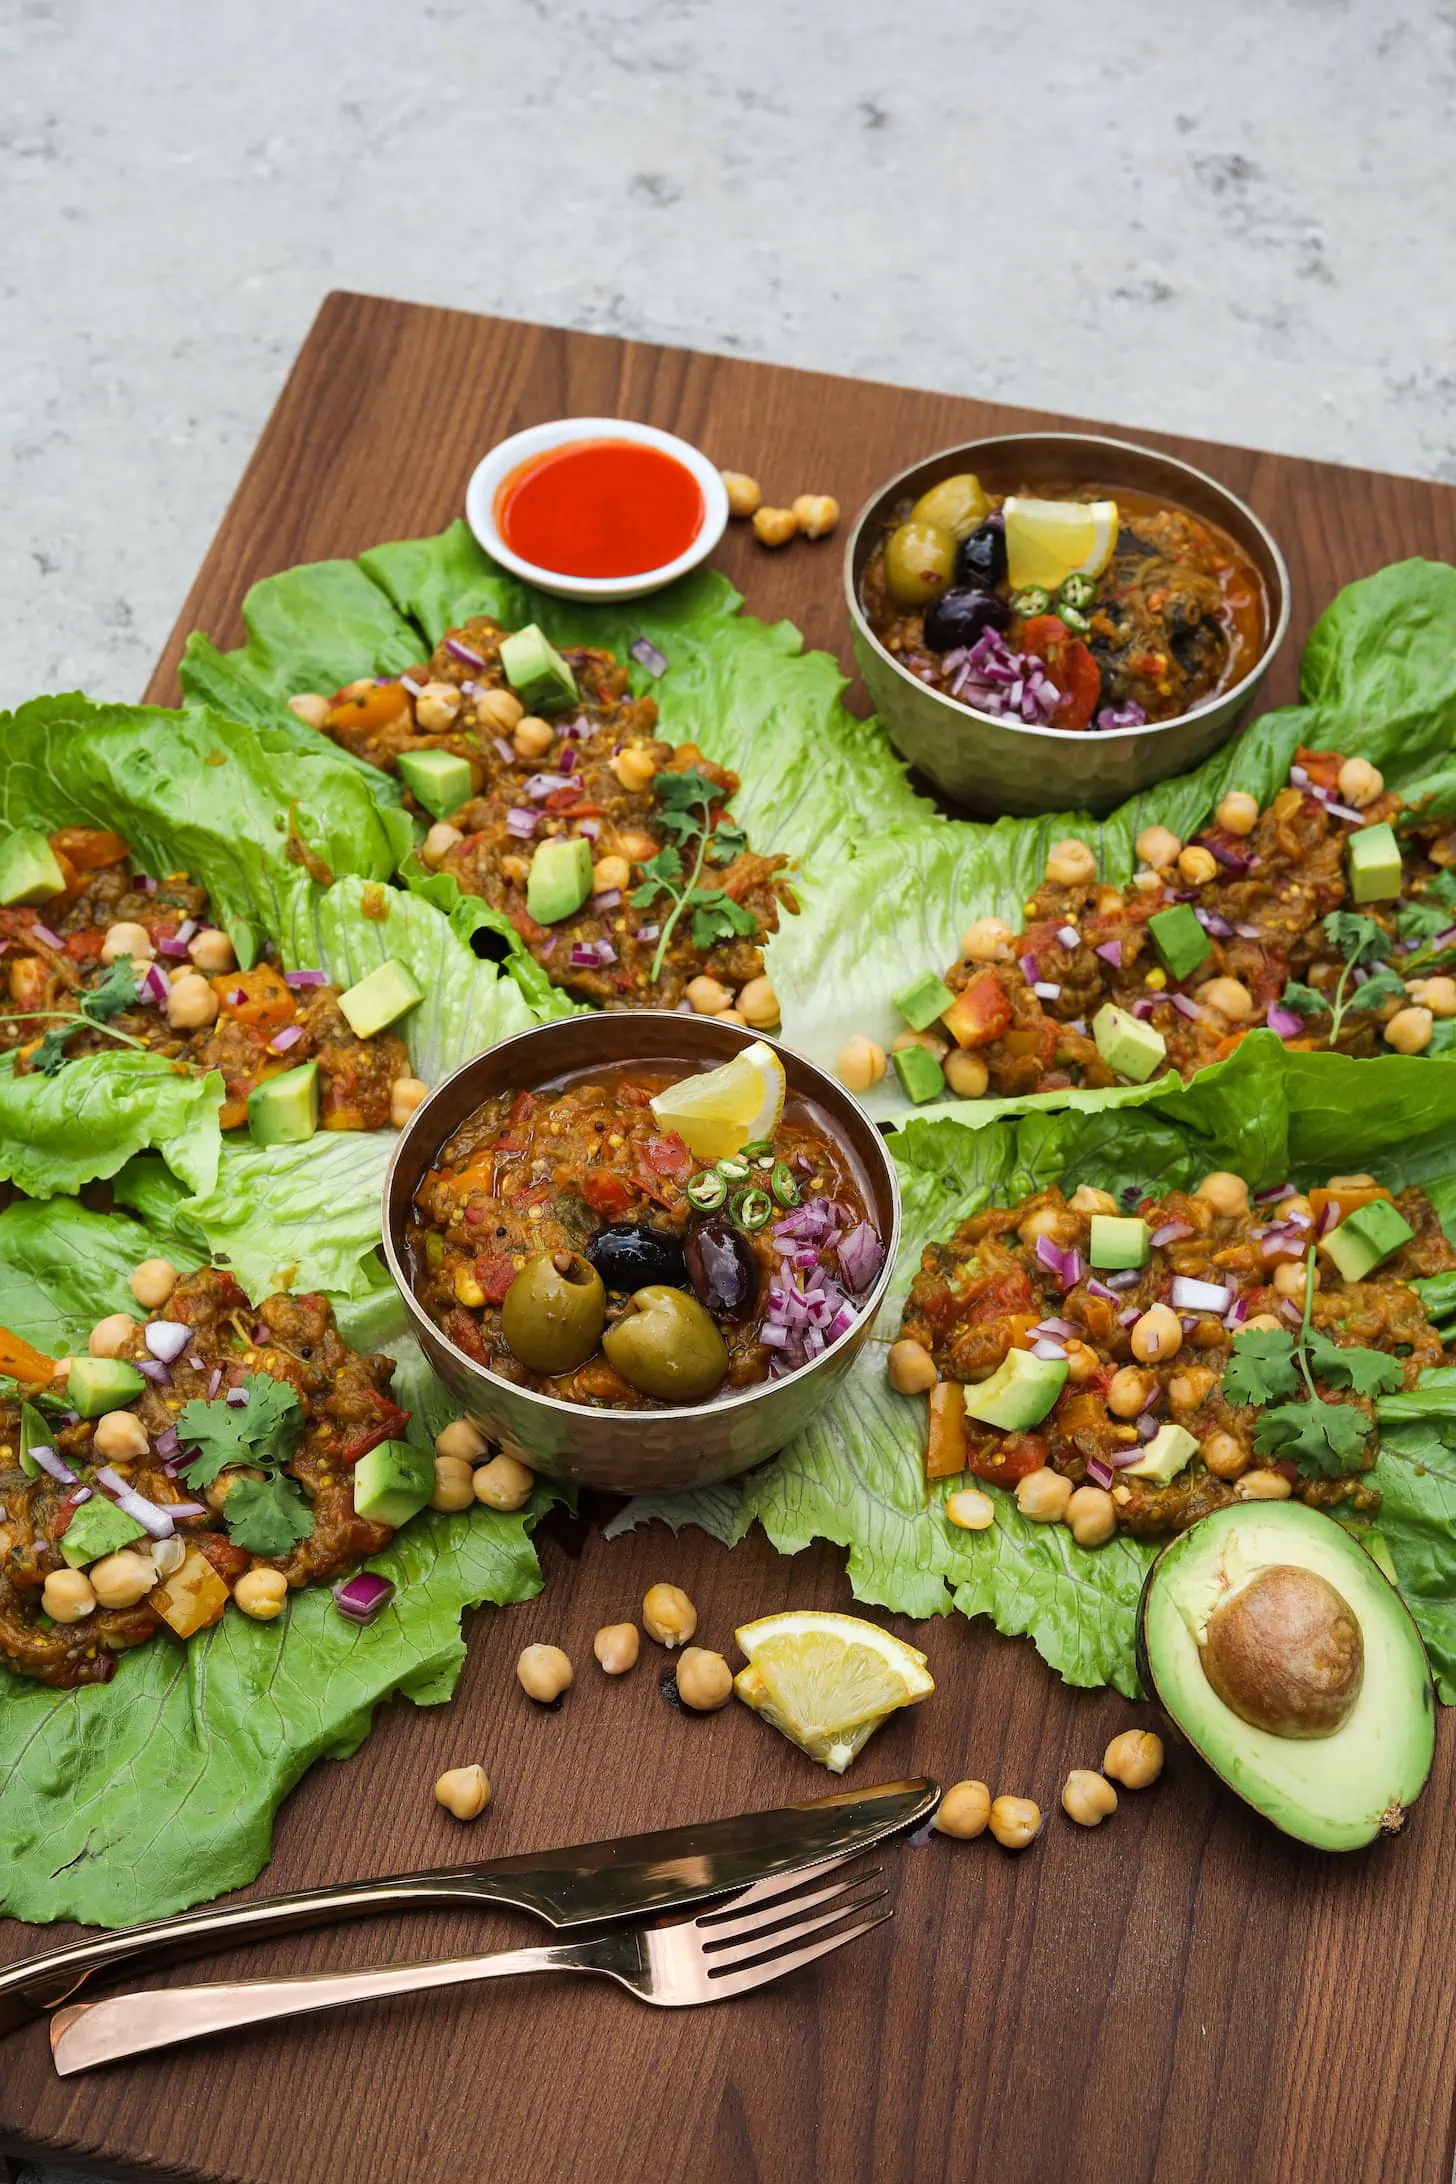 perspective shot of lettuce leaves stuffed with mashed eggplant and topped with avocado pieces and chickpeas with two bowls of mashed eggplant arranged around.